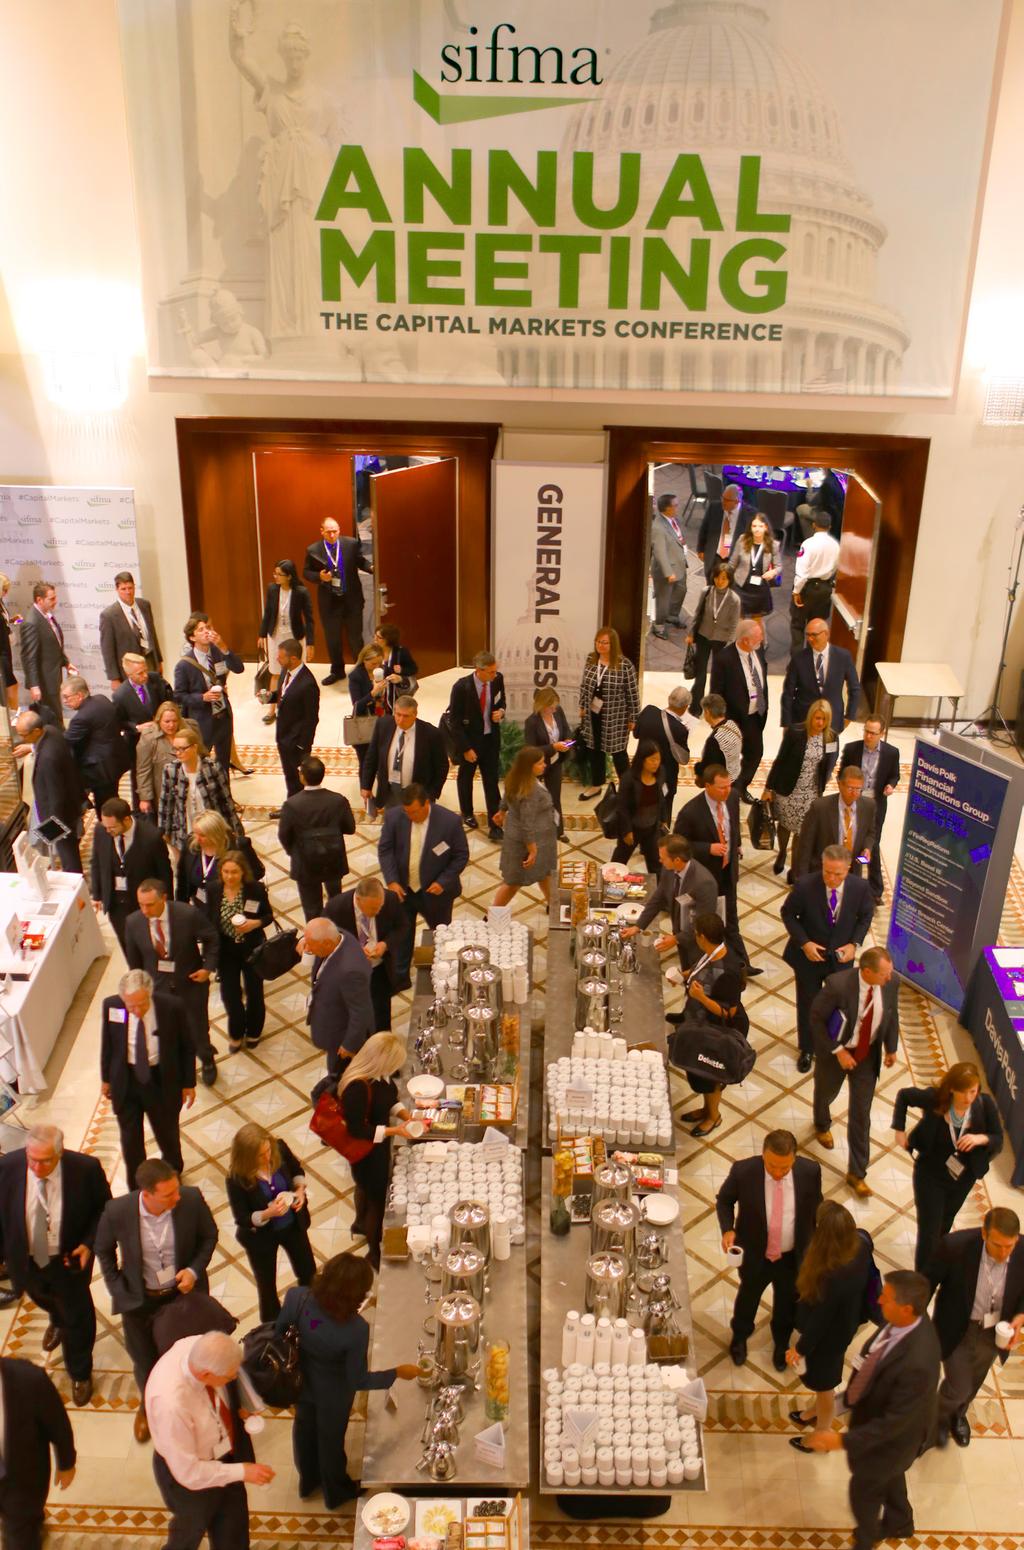 ANNUAL MEETING 2018 An Overview of SIFMA s Annual Meeting 2018 Each fall, SIFMA s Annual Meeting gathers for candid one-on-one conversations and in-depth breakout sessions on the state of our capital